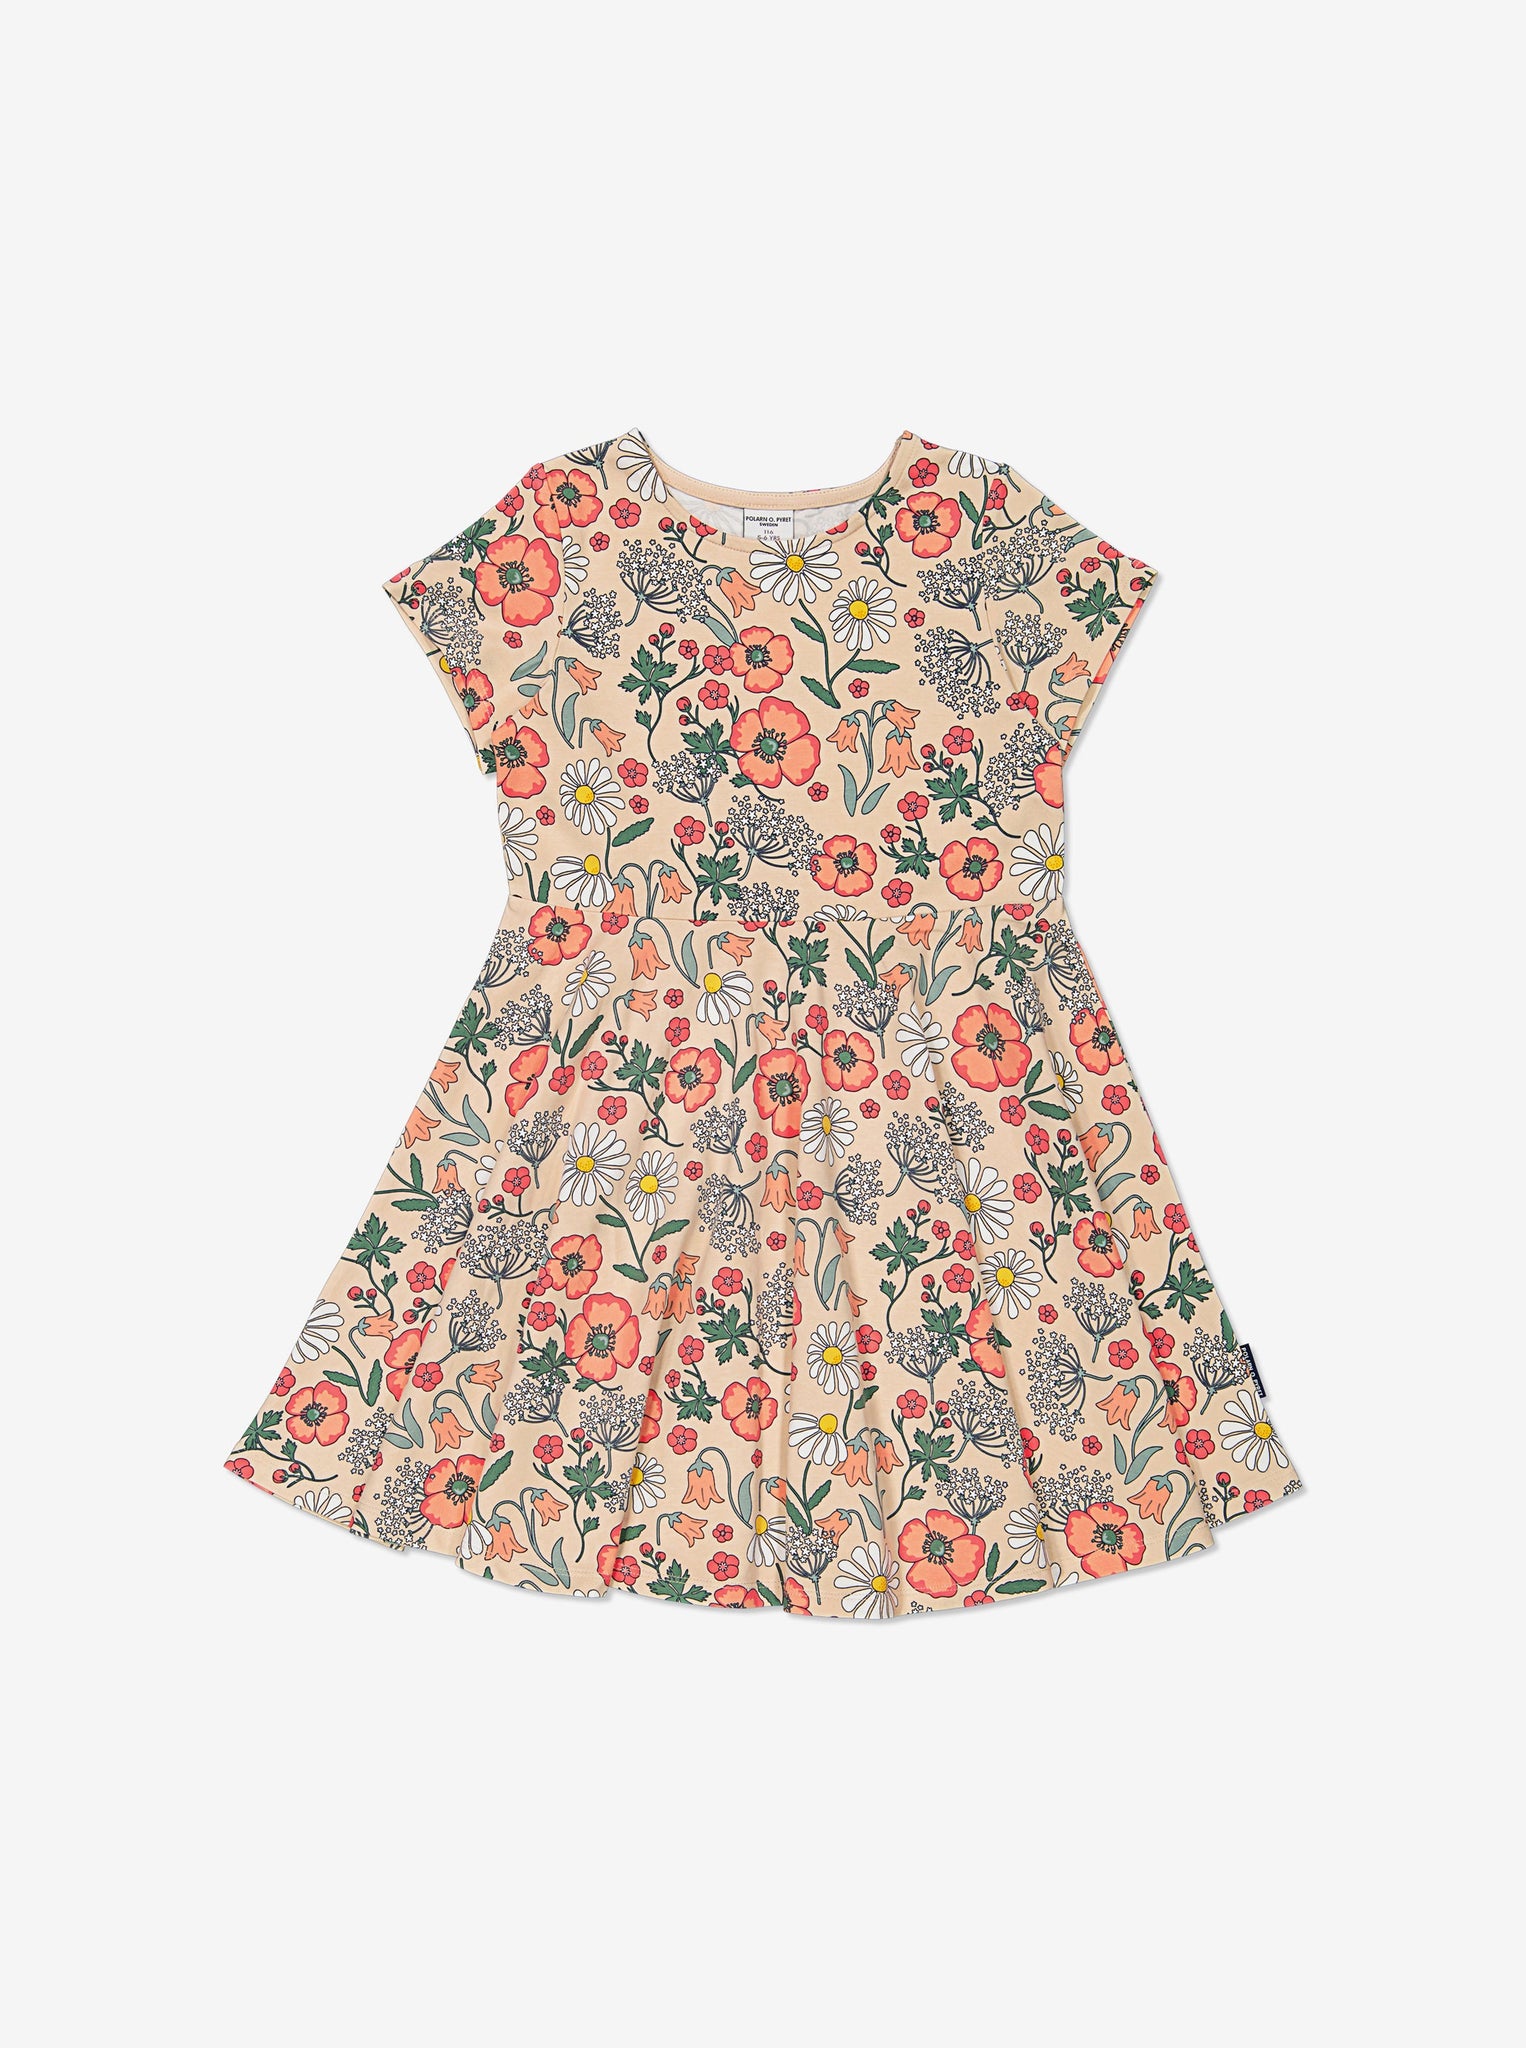 Organic Cotton Floral Girls Dress from Polarn O. Pyret Kidswear. Ethically made and sustainably sourced materials.